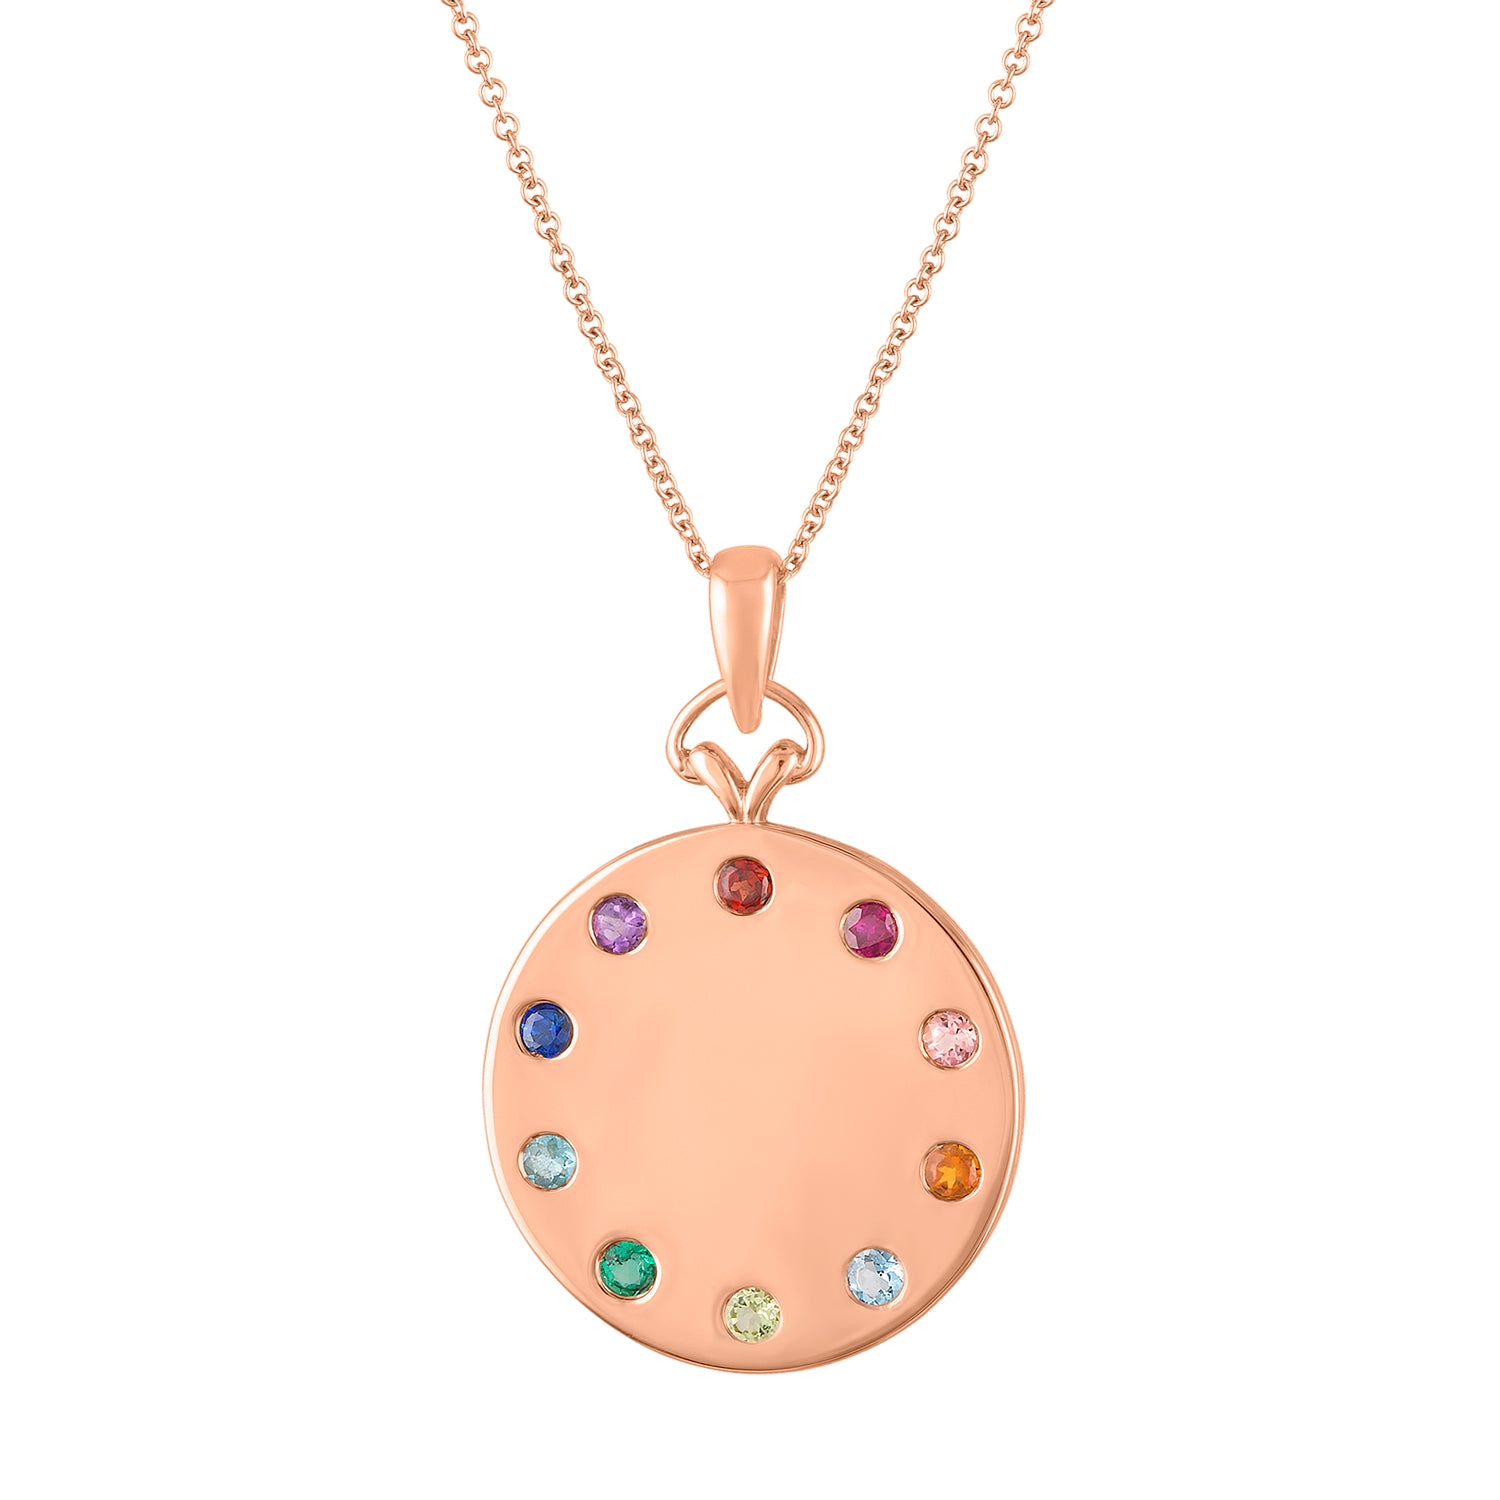 Rose gold disc necklace with round multicolor stones around the border.